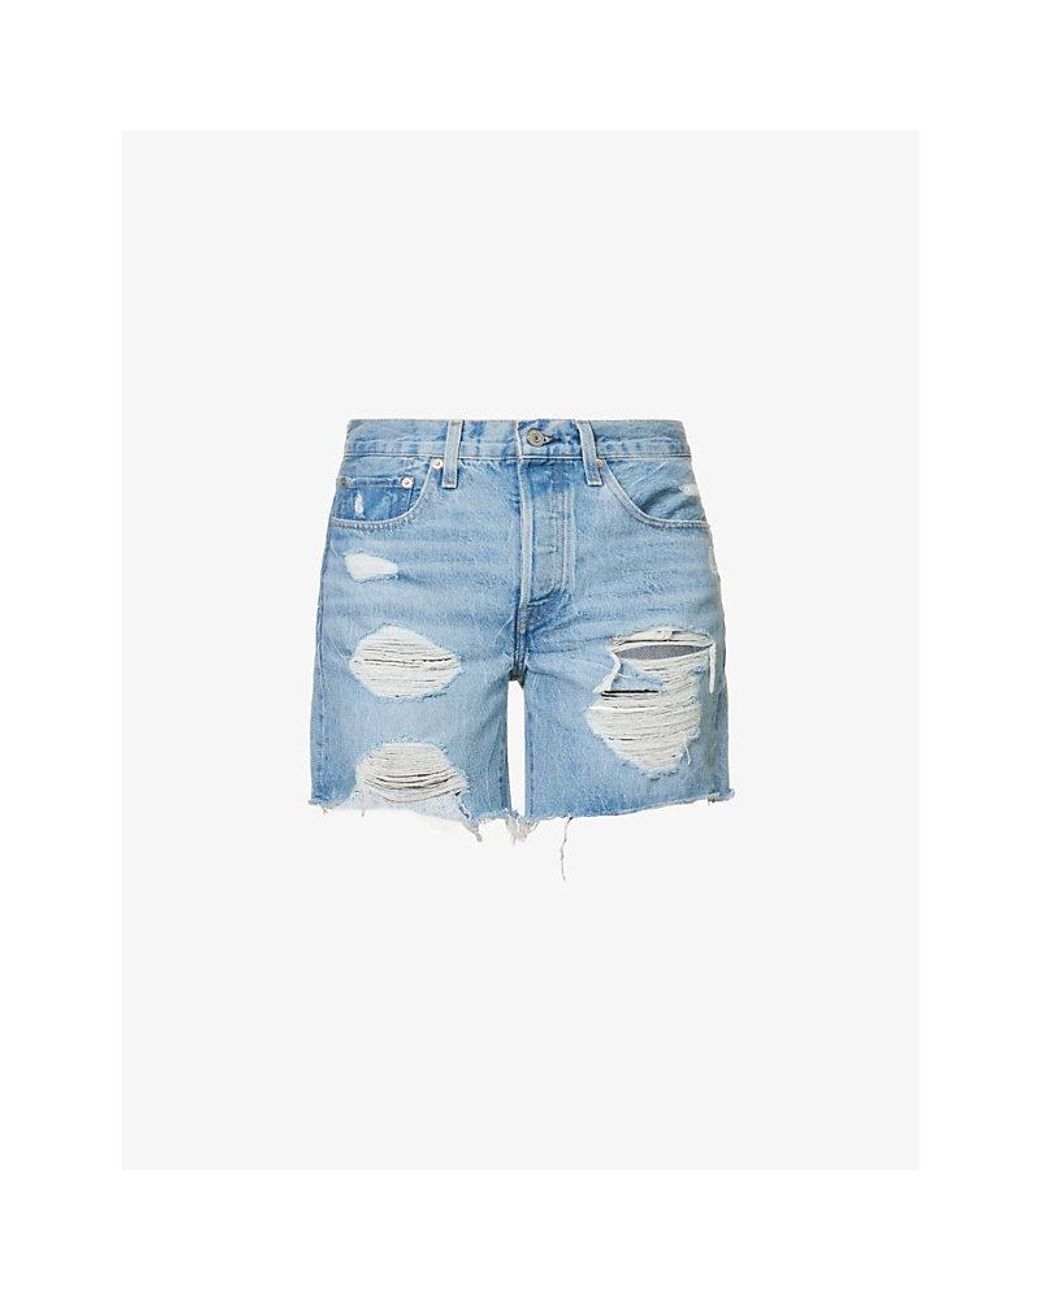 My new favorite distressed denim for the summer Levis 501 Crop Jeans   Style with Nihan